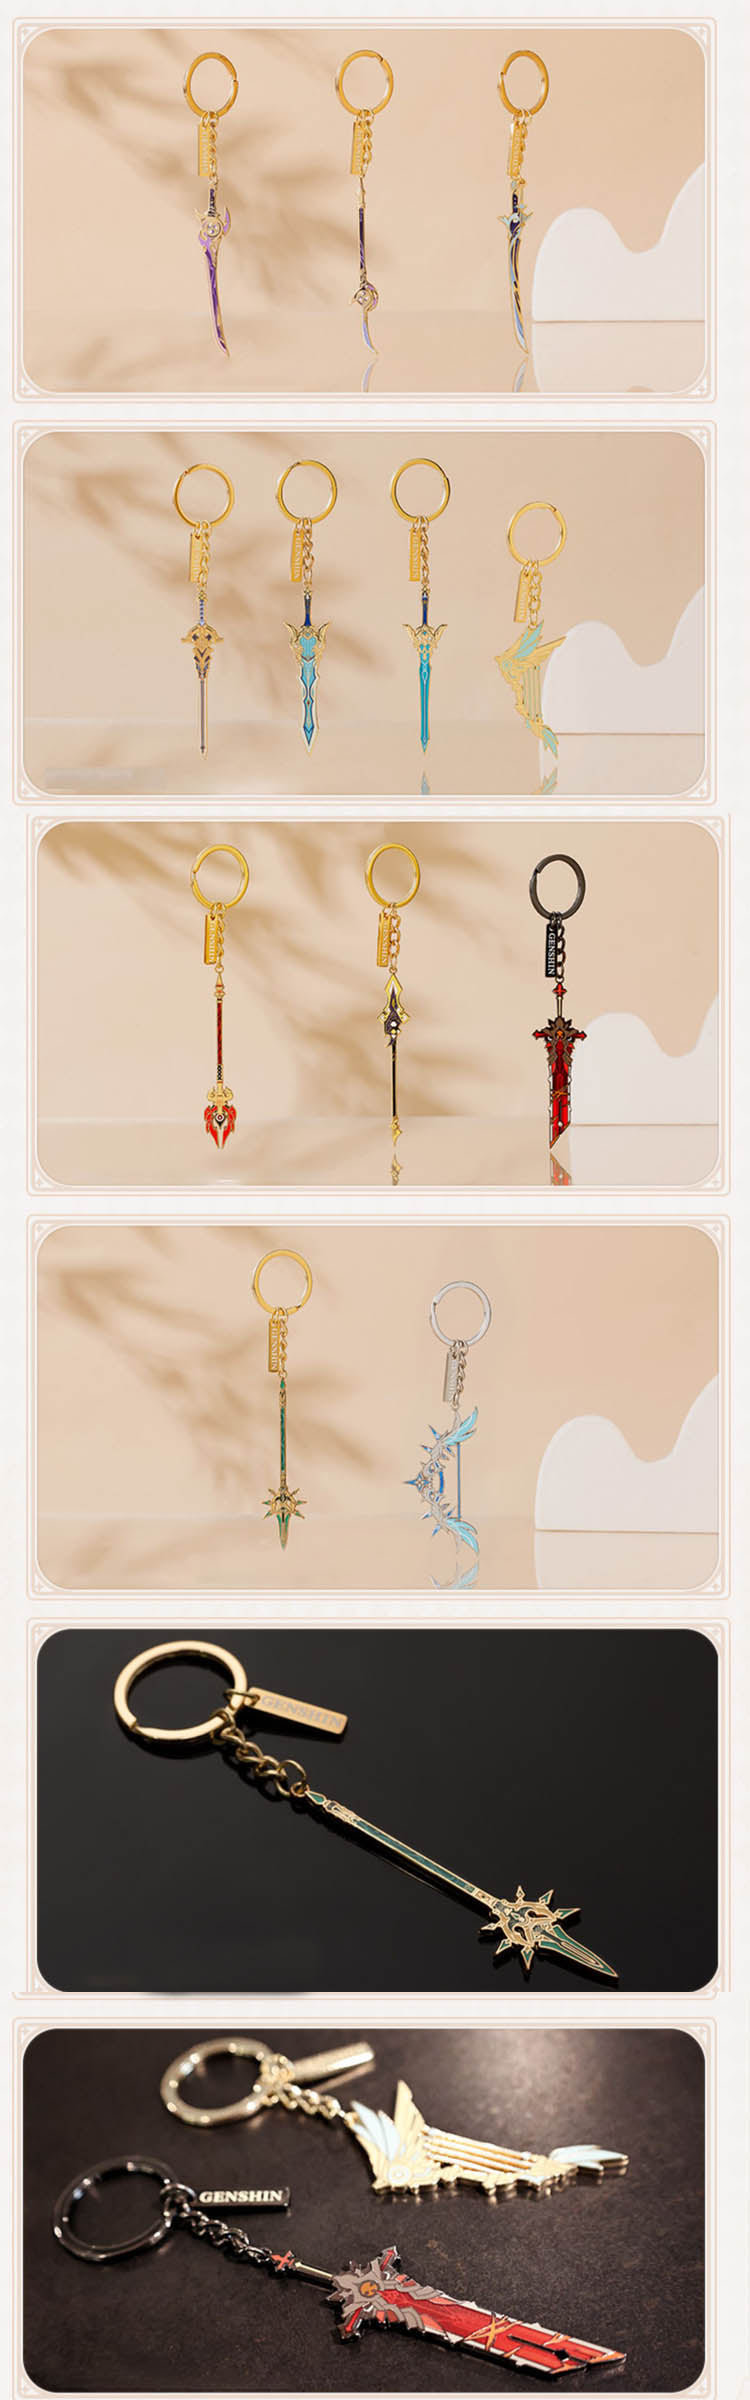 Genshin Official Weapons Metal Keychain Pendant